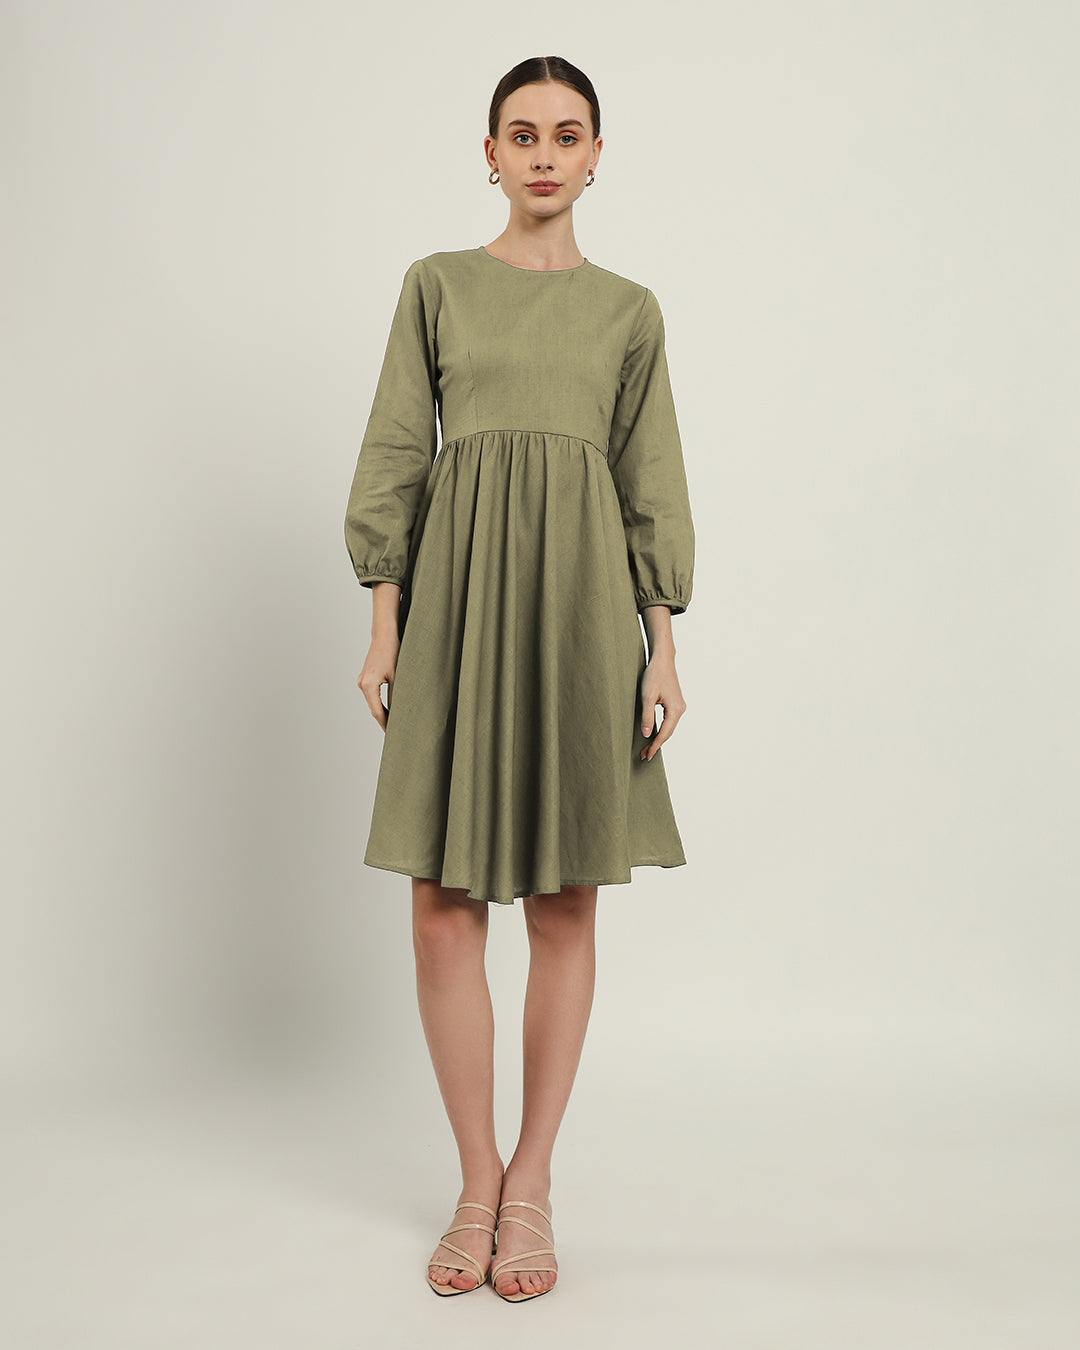 The Exeter Daisy Olive Linen Dress